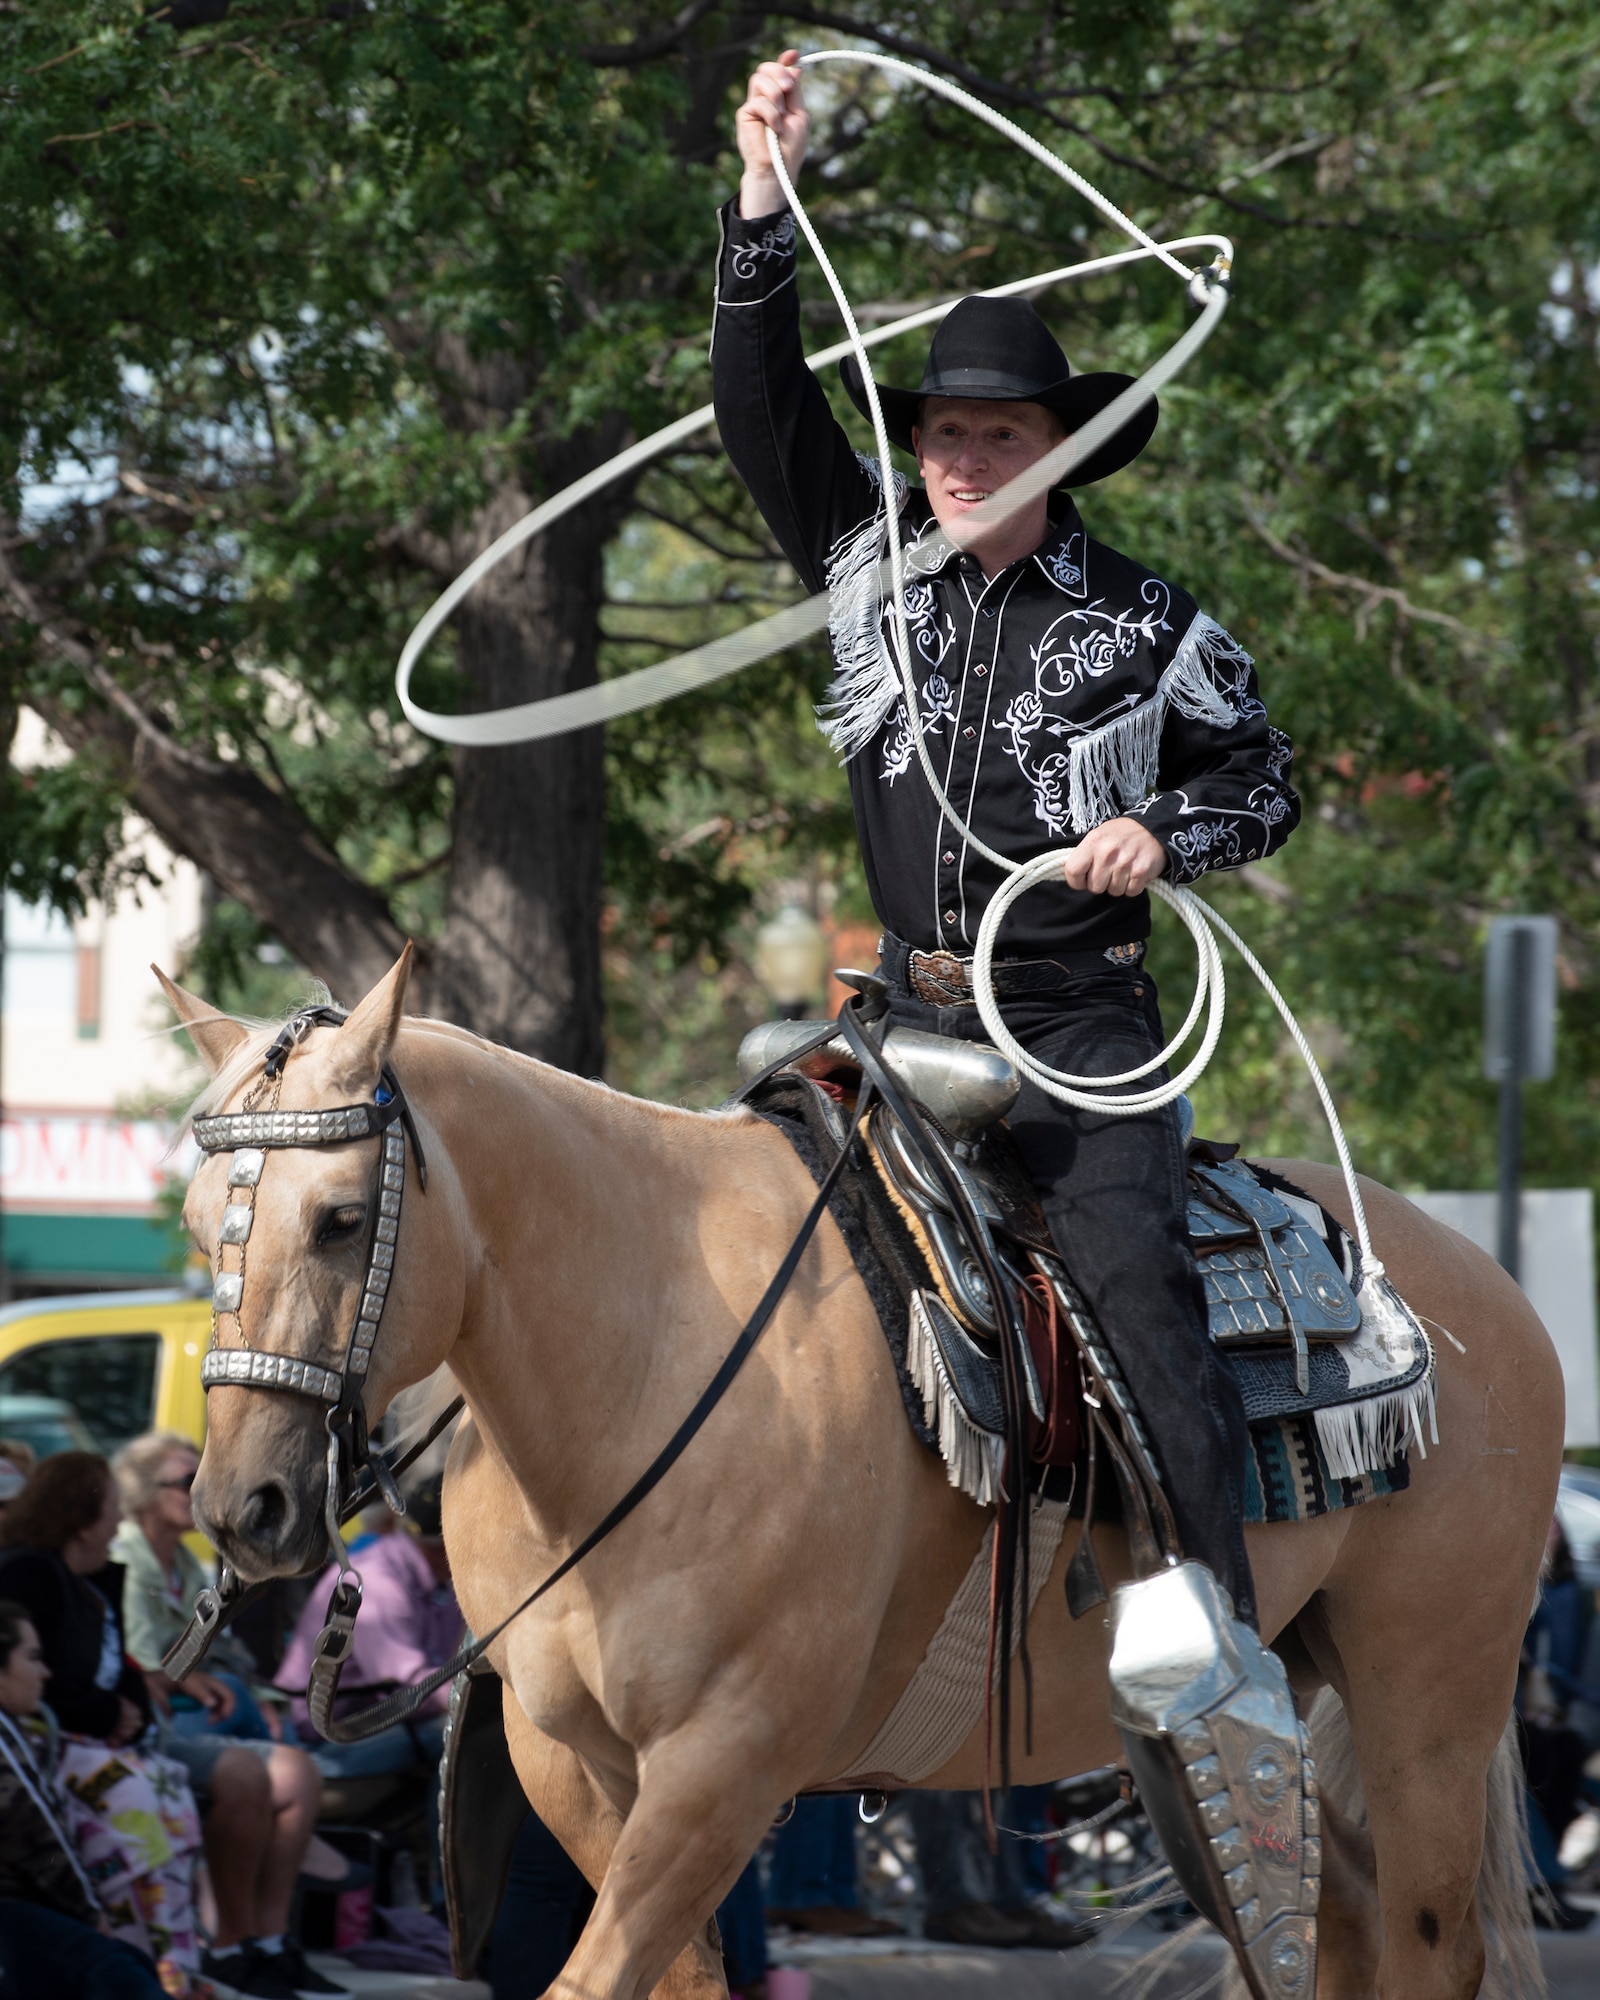 A cowboy roper performs lasso tricks during the Grand Parade in Cheyenne, Wyo., July 20, 2019. The F.E. Warren Air Force Base and Cheyenne communities came together to celebrate the CFD rodeo and festival, which runs from July 19-28. (U.S. Air Force photo by Senior Airman Abbigayle Willams )